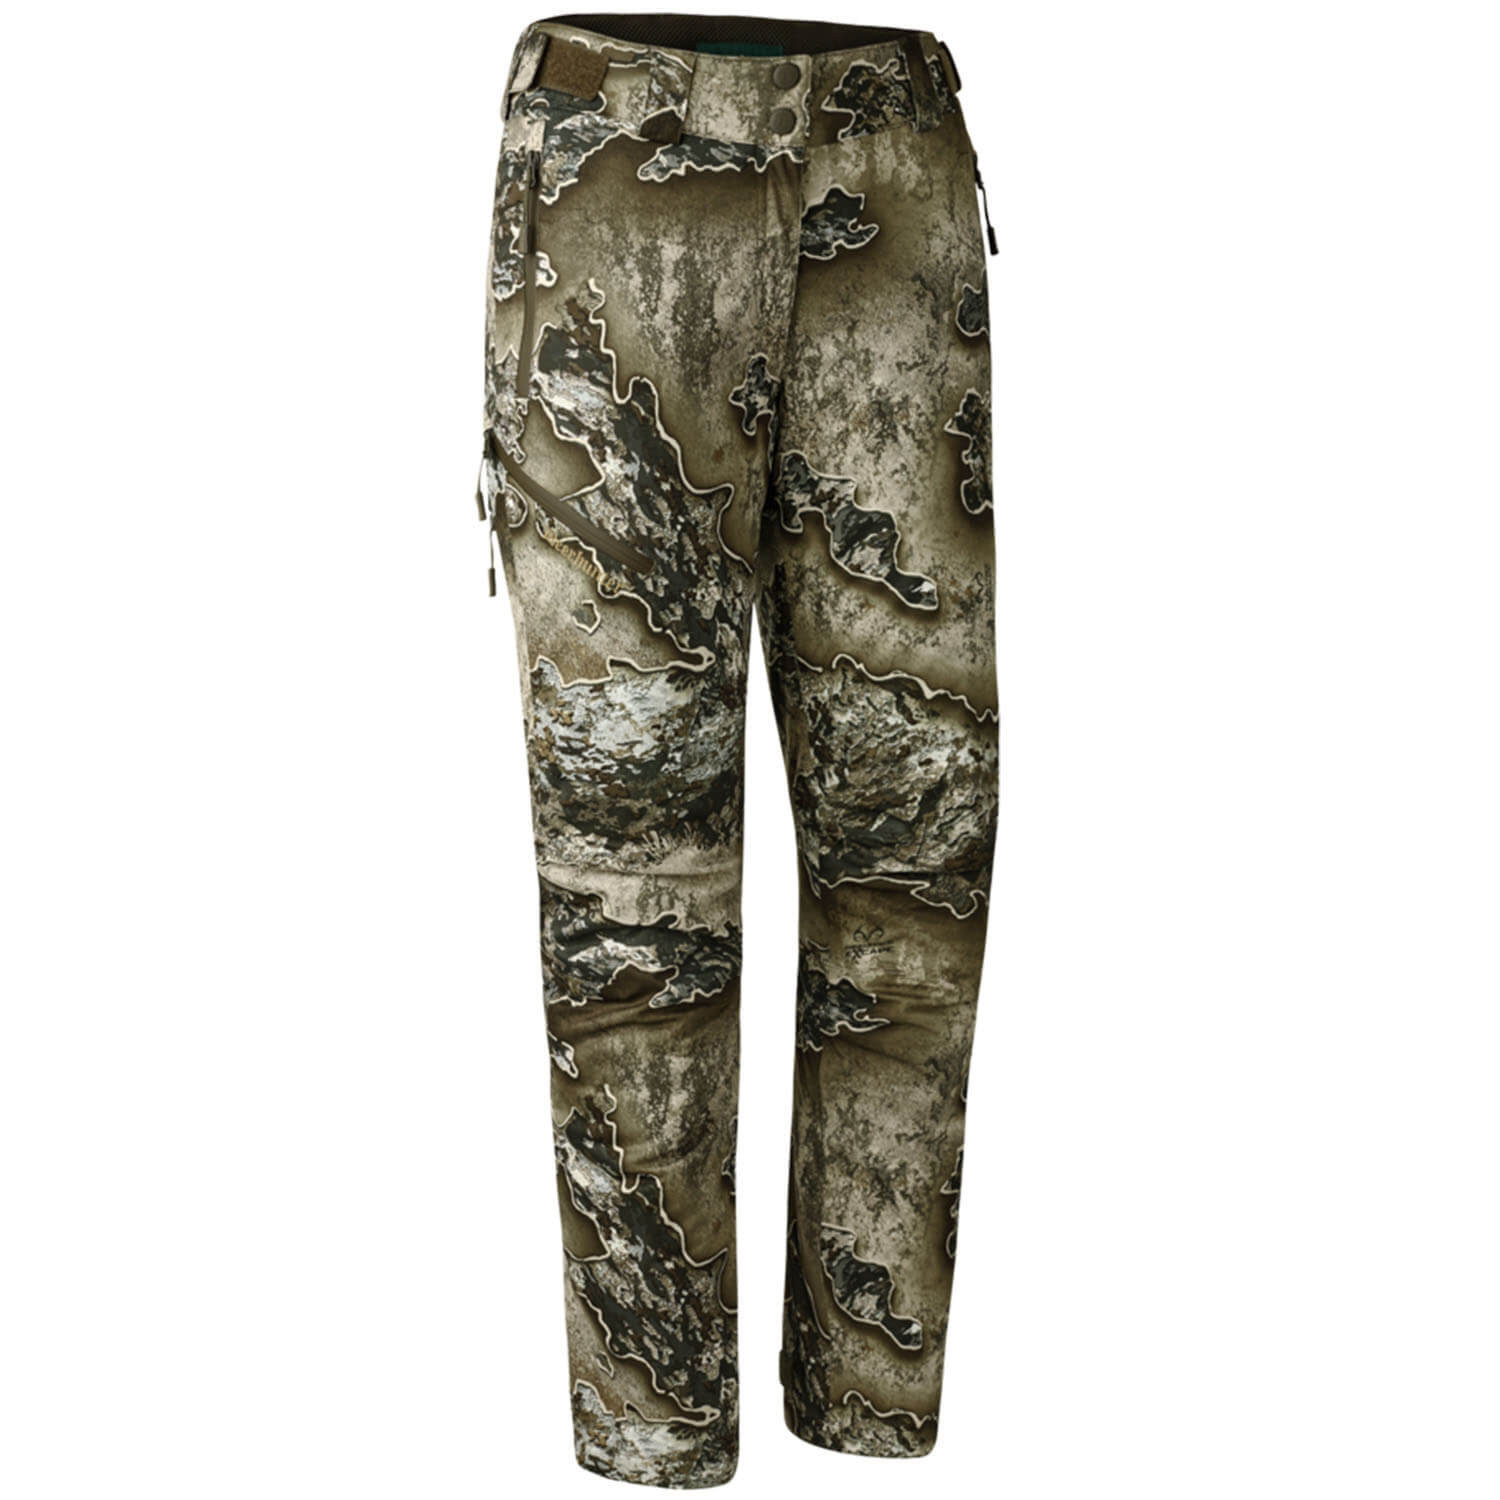 Deerhunter winter Trousers Lady Excape (realtree excape) - Hunting Trousers